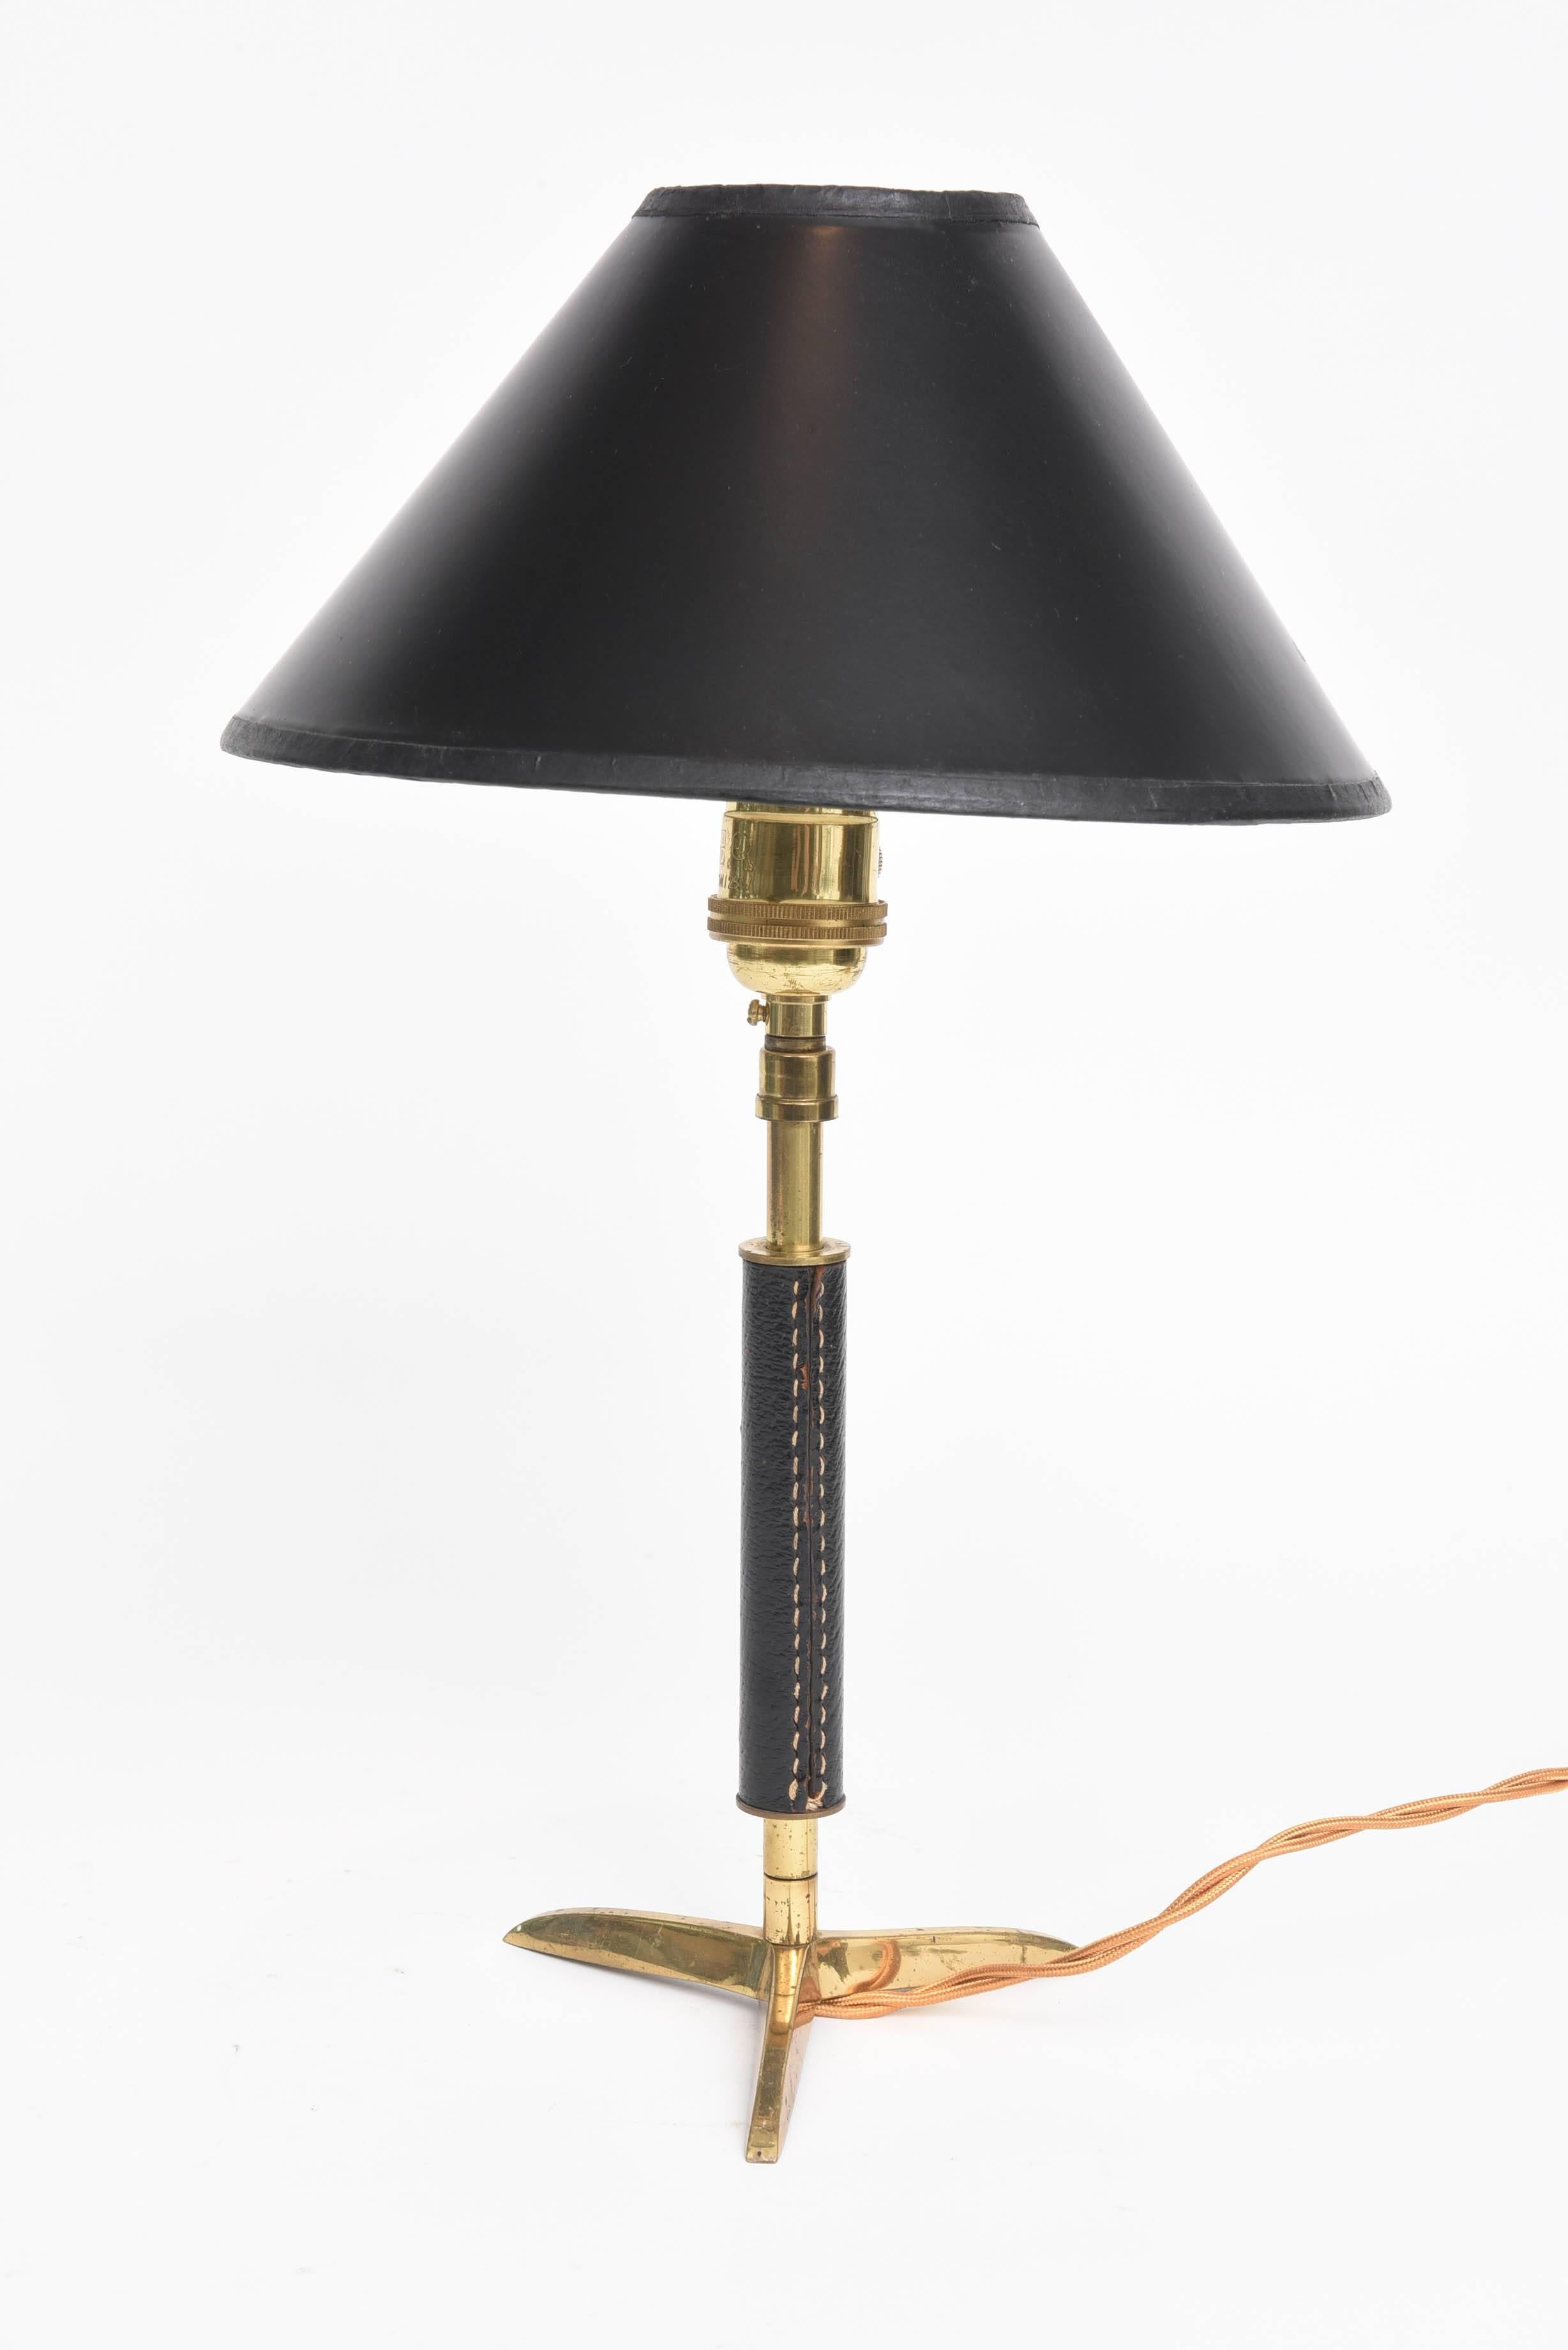 Handsome leather wrapped brass tripod lamp in the style of Jacques Adnet (1901-1984) a French Art Deco modernist designer, architect and interior designer.

Includes black paper clamp lampshade.